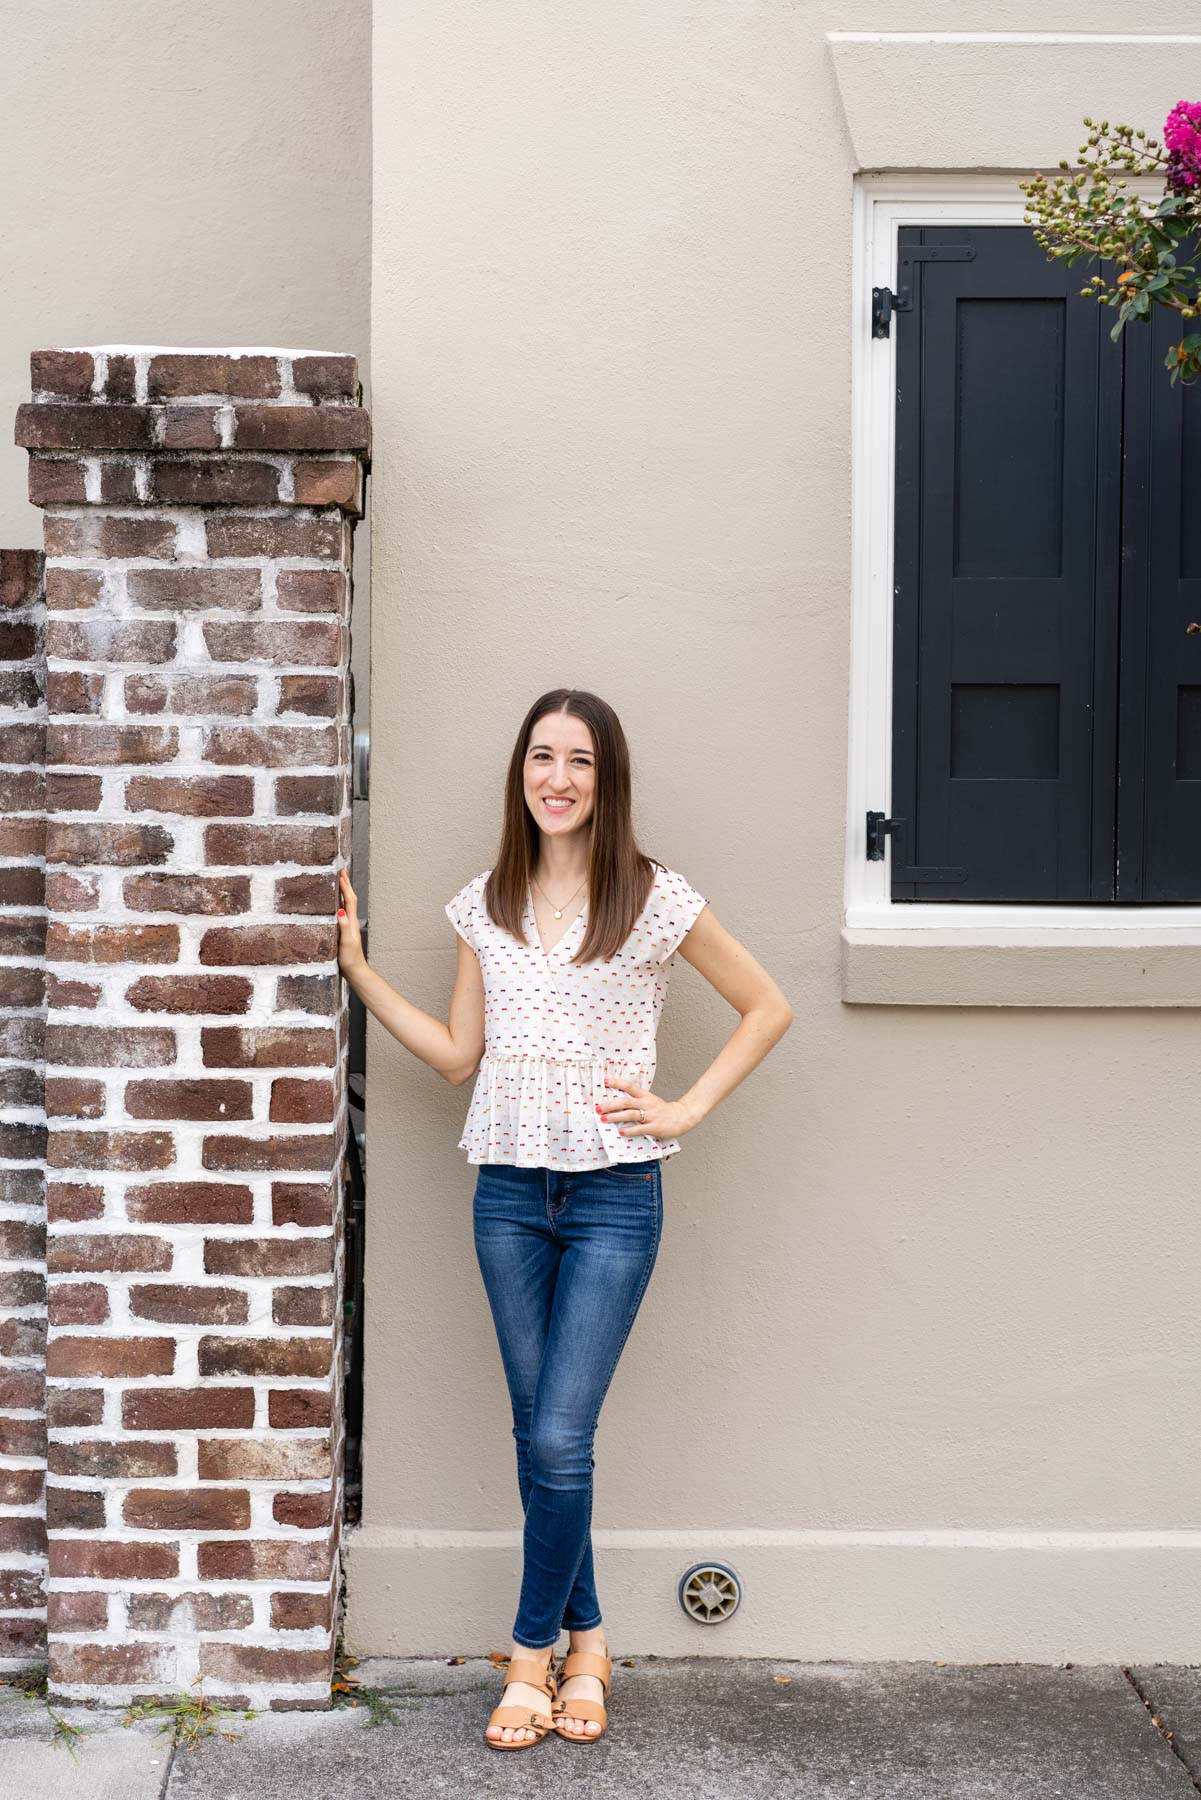 Woman in denim jeans and a white blouse demonstrating how to pose for a photoshoot by crossing her ankles and lightly placing a hand on a nearby brick wall